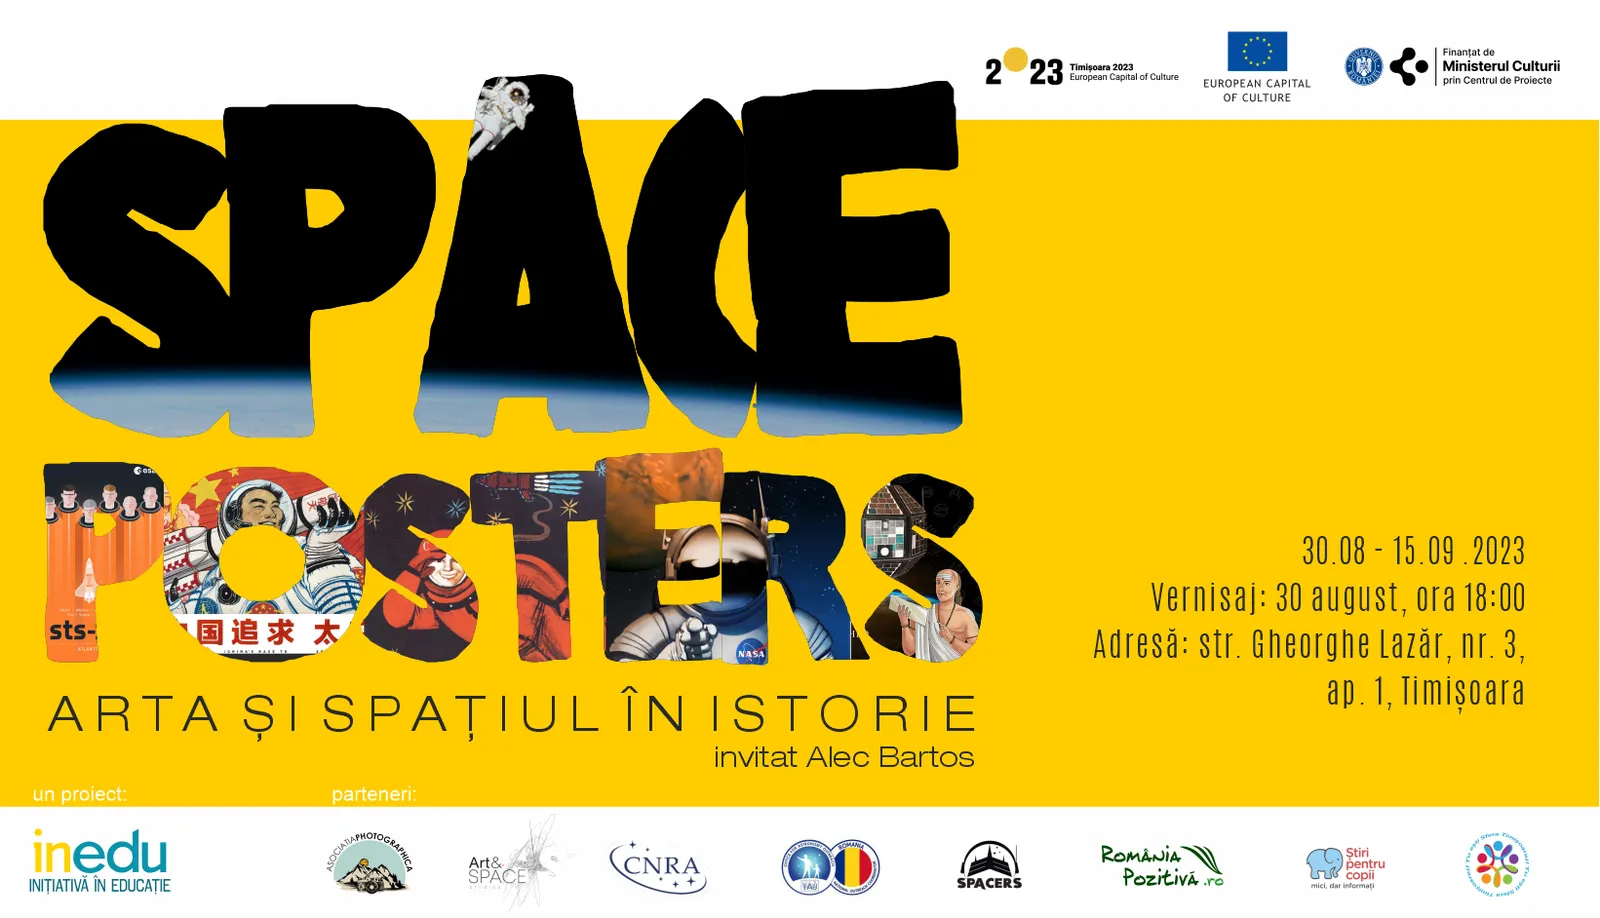 Opening: Space Posters – Art and Space in History, close circuit program